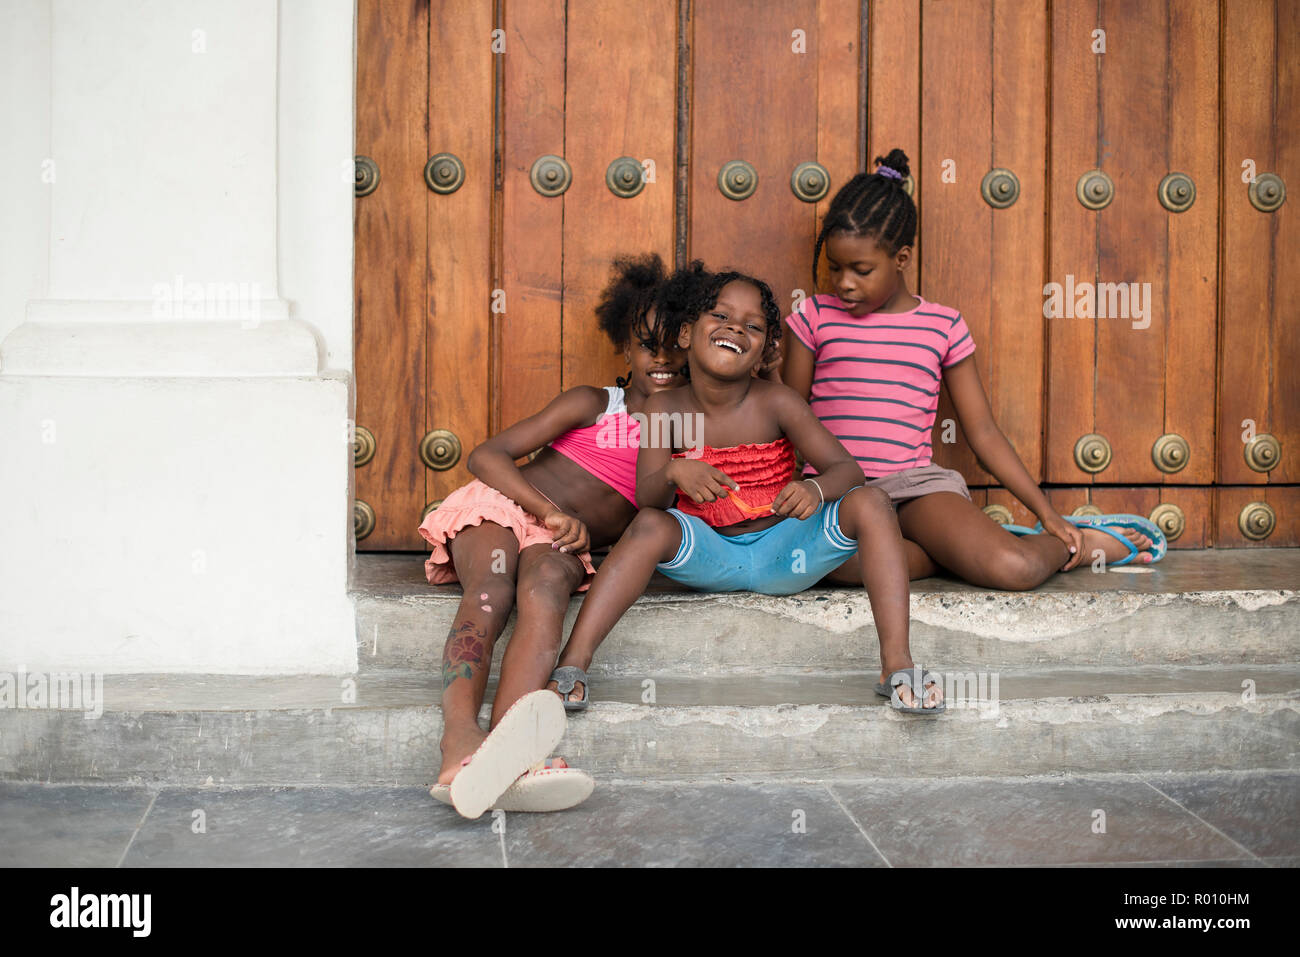 Some silly girls pose for the camera in a plaza in Havana, Cuba. Stock Photo